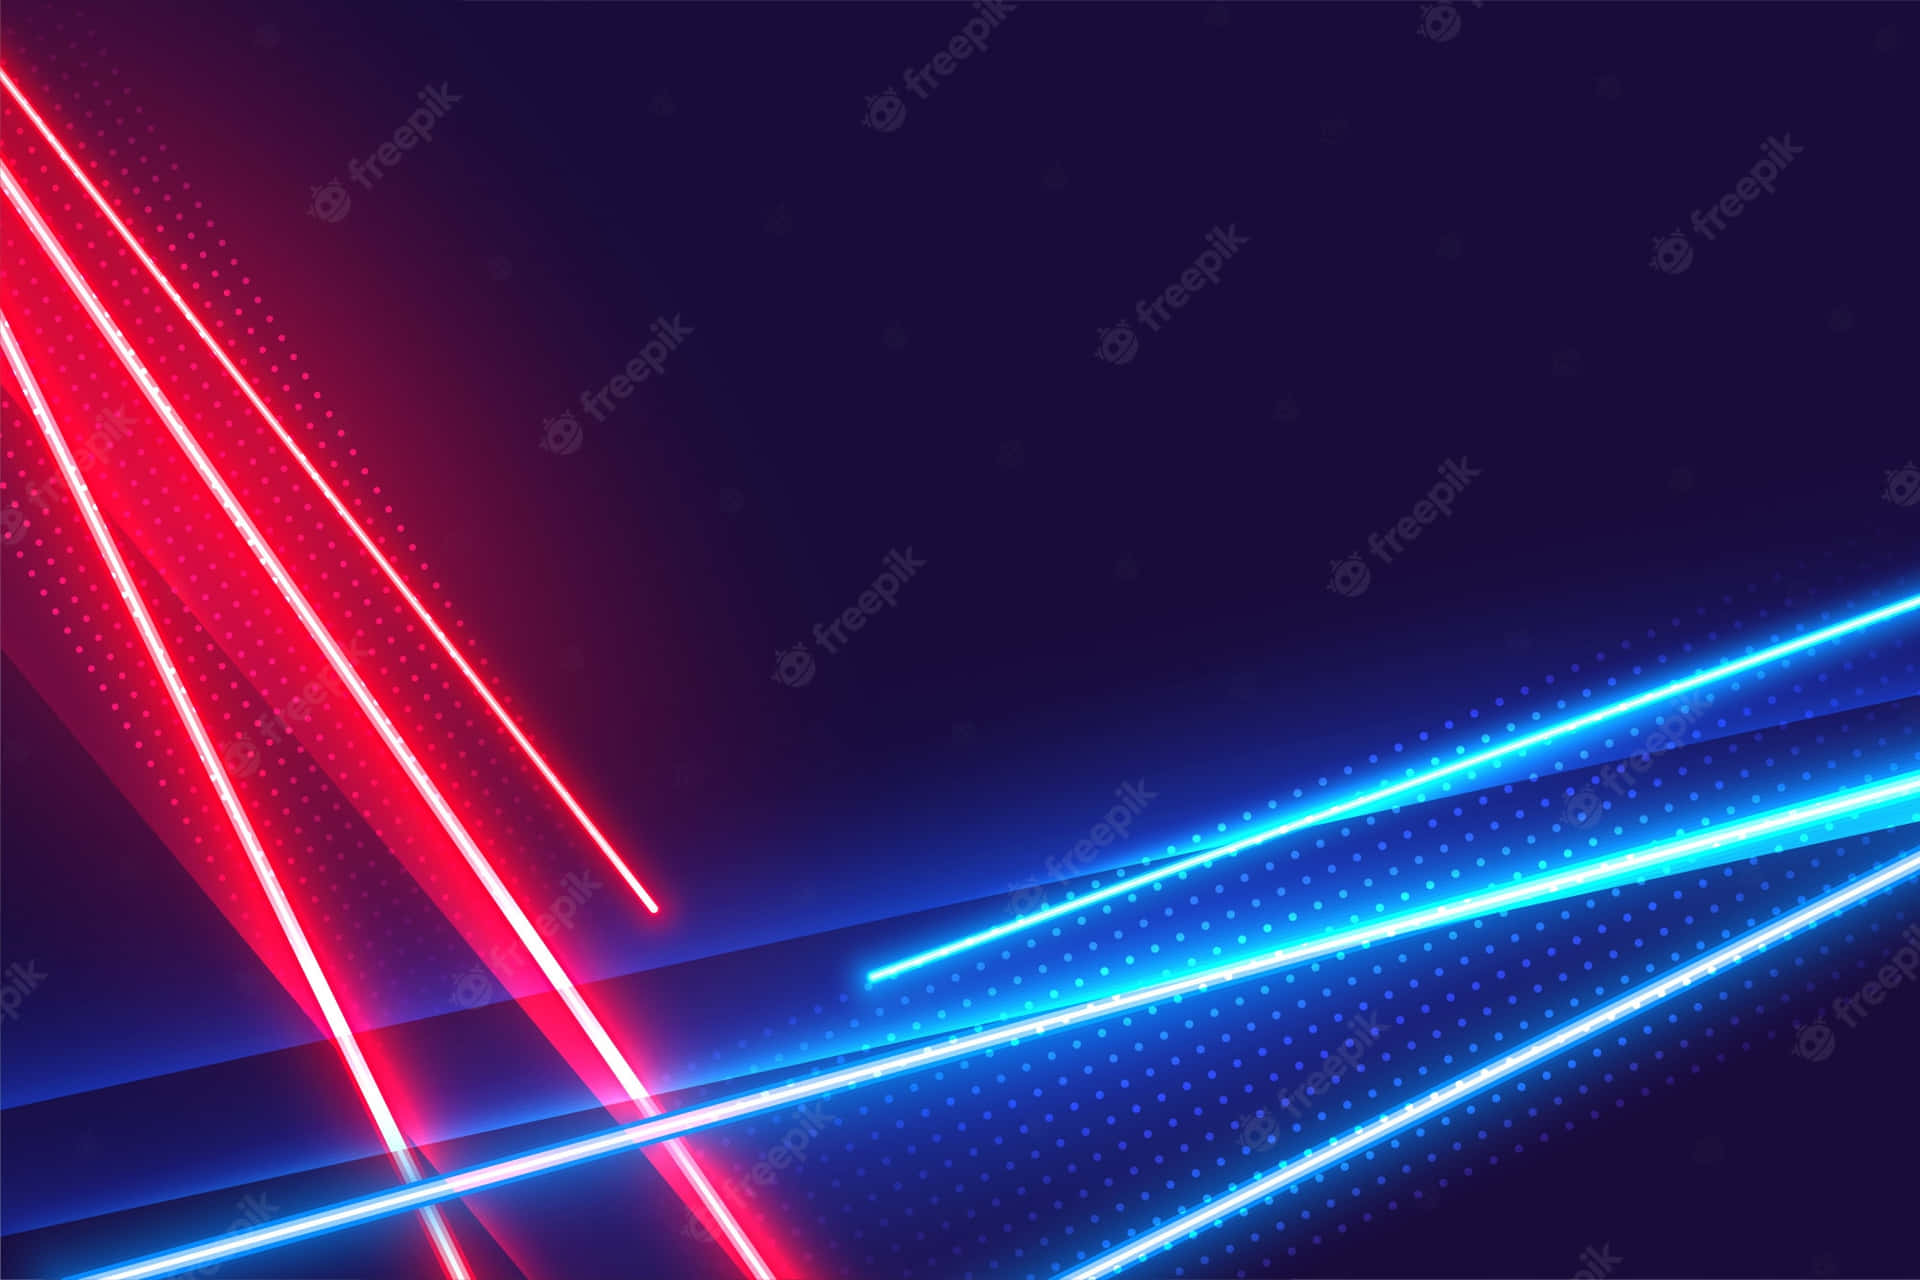 "Bring on the party vibes with these vibrant blue neon lights!" Wallpaper